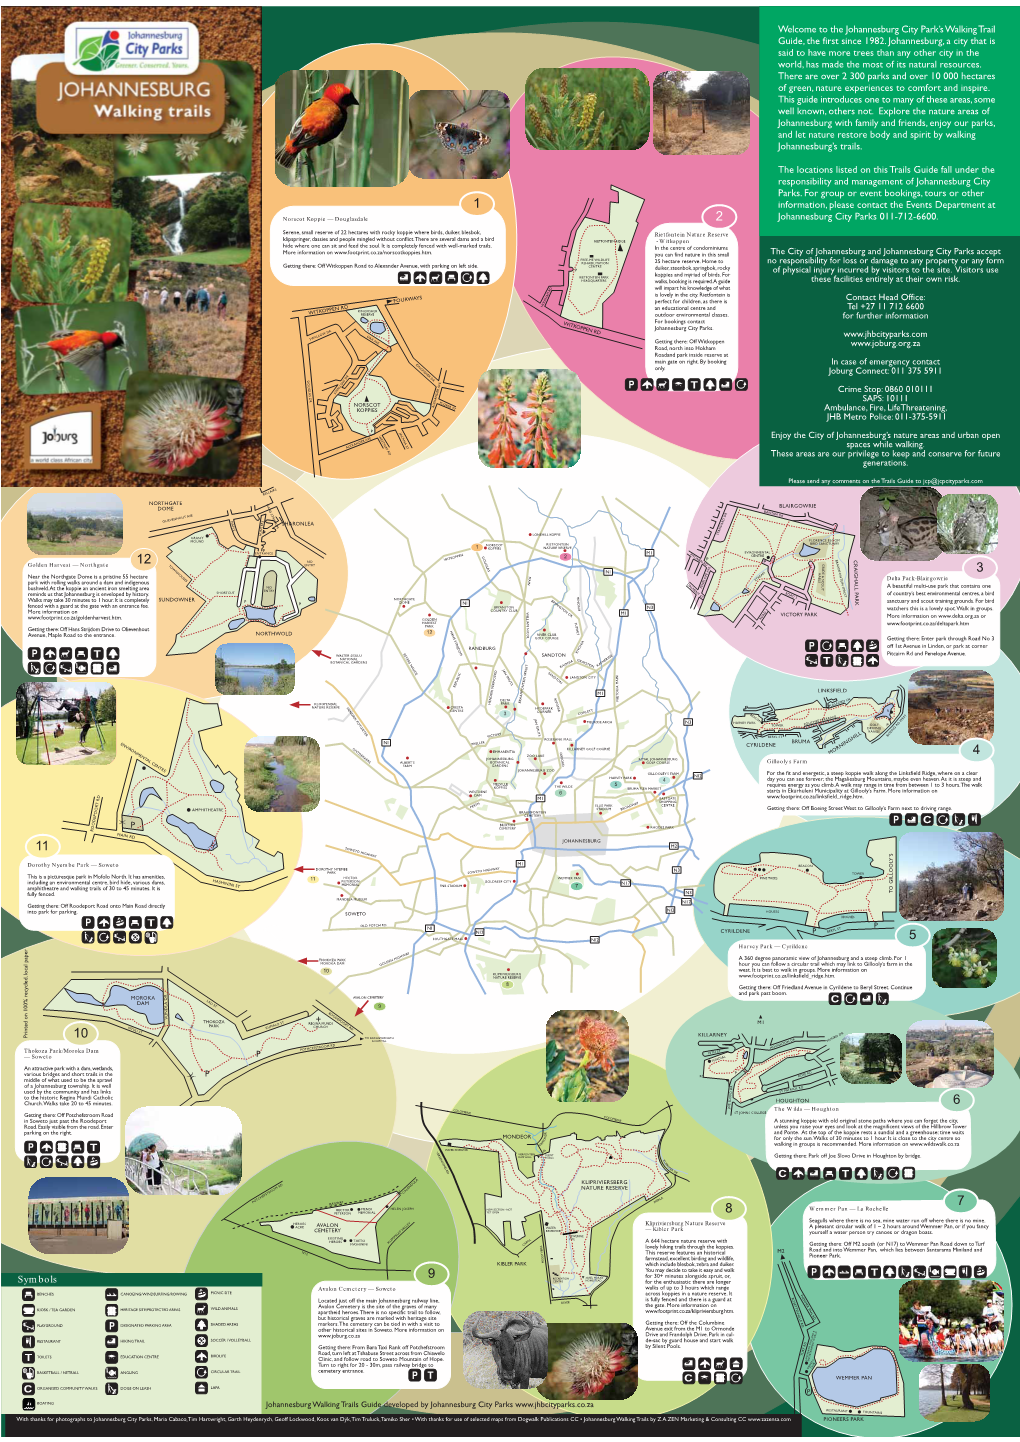 Welcome to the Johannesburg City Park's Walking Trail Guide, the First